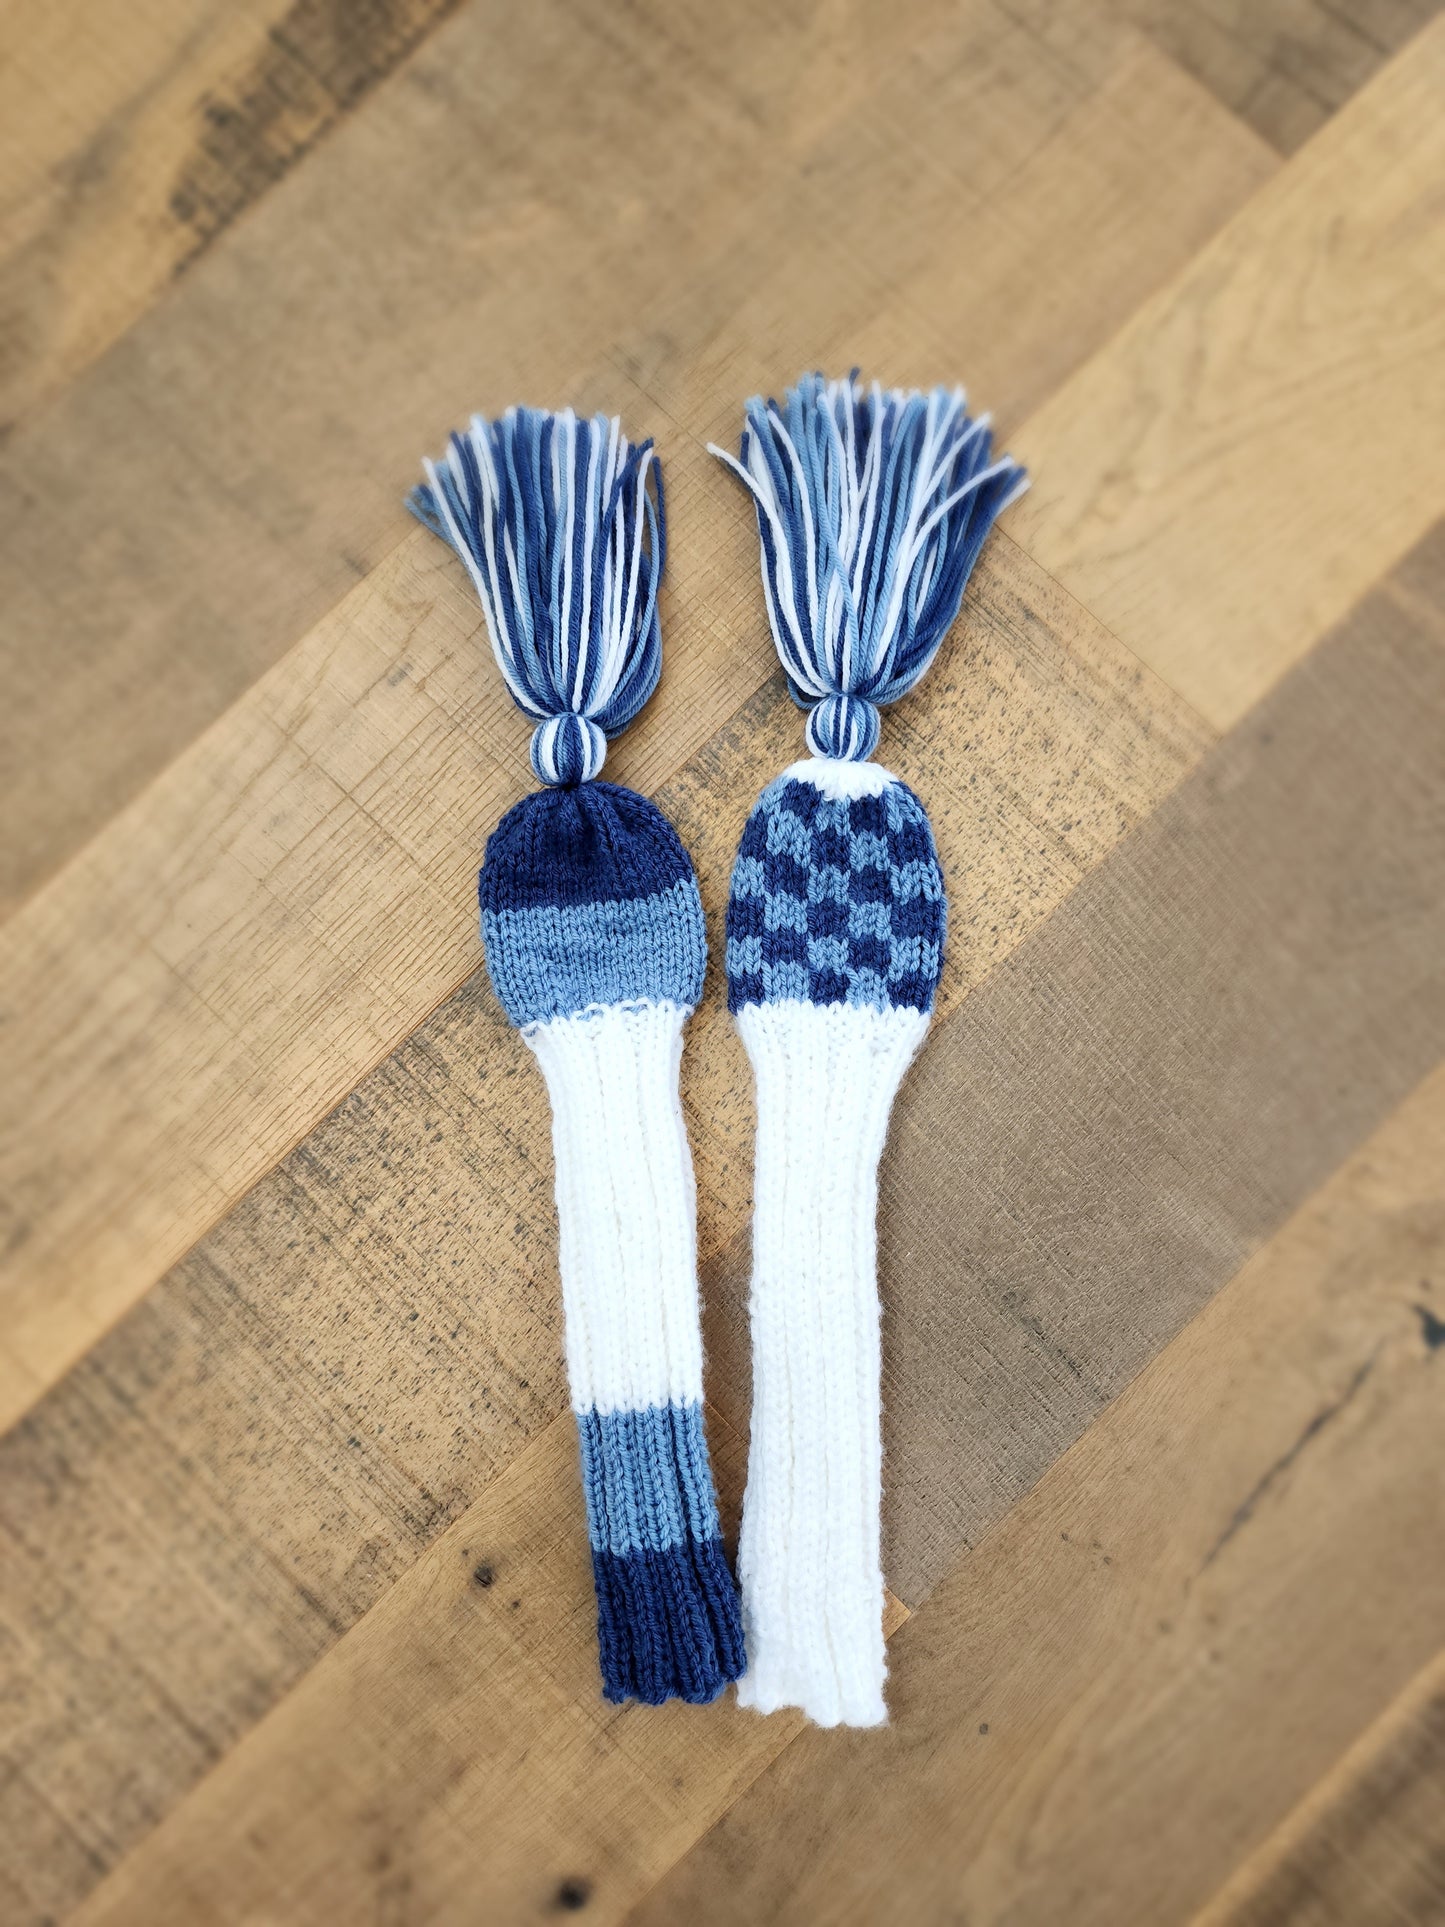 Two Golf Club Head Covers Retro-Vintage Blue & White with Tassels for Driver & Fairway Wood - Austinknittylimits